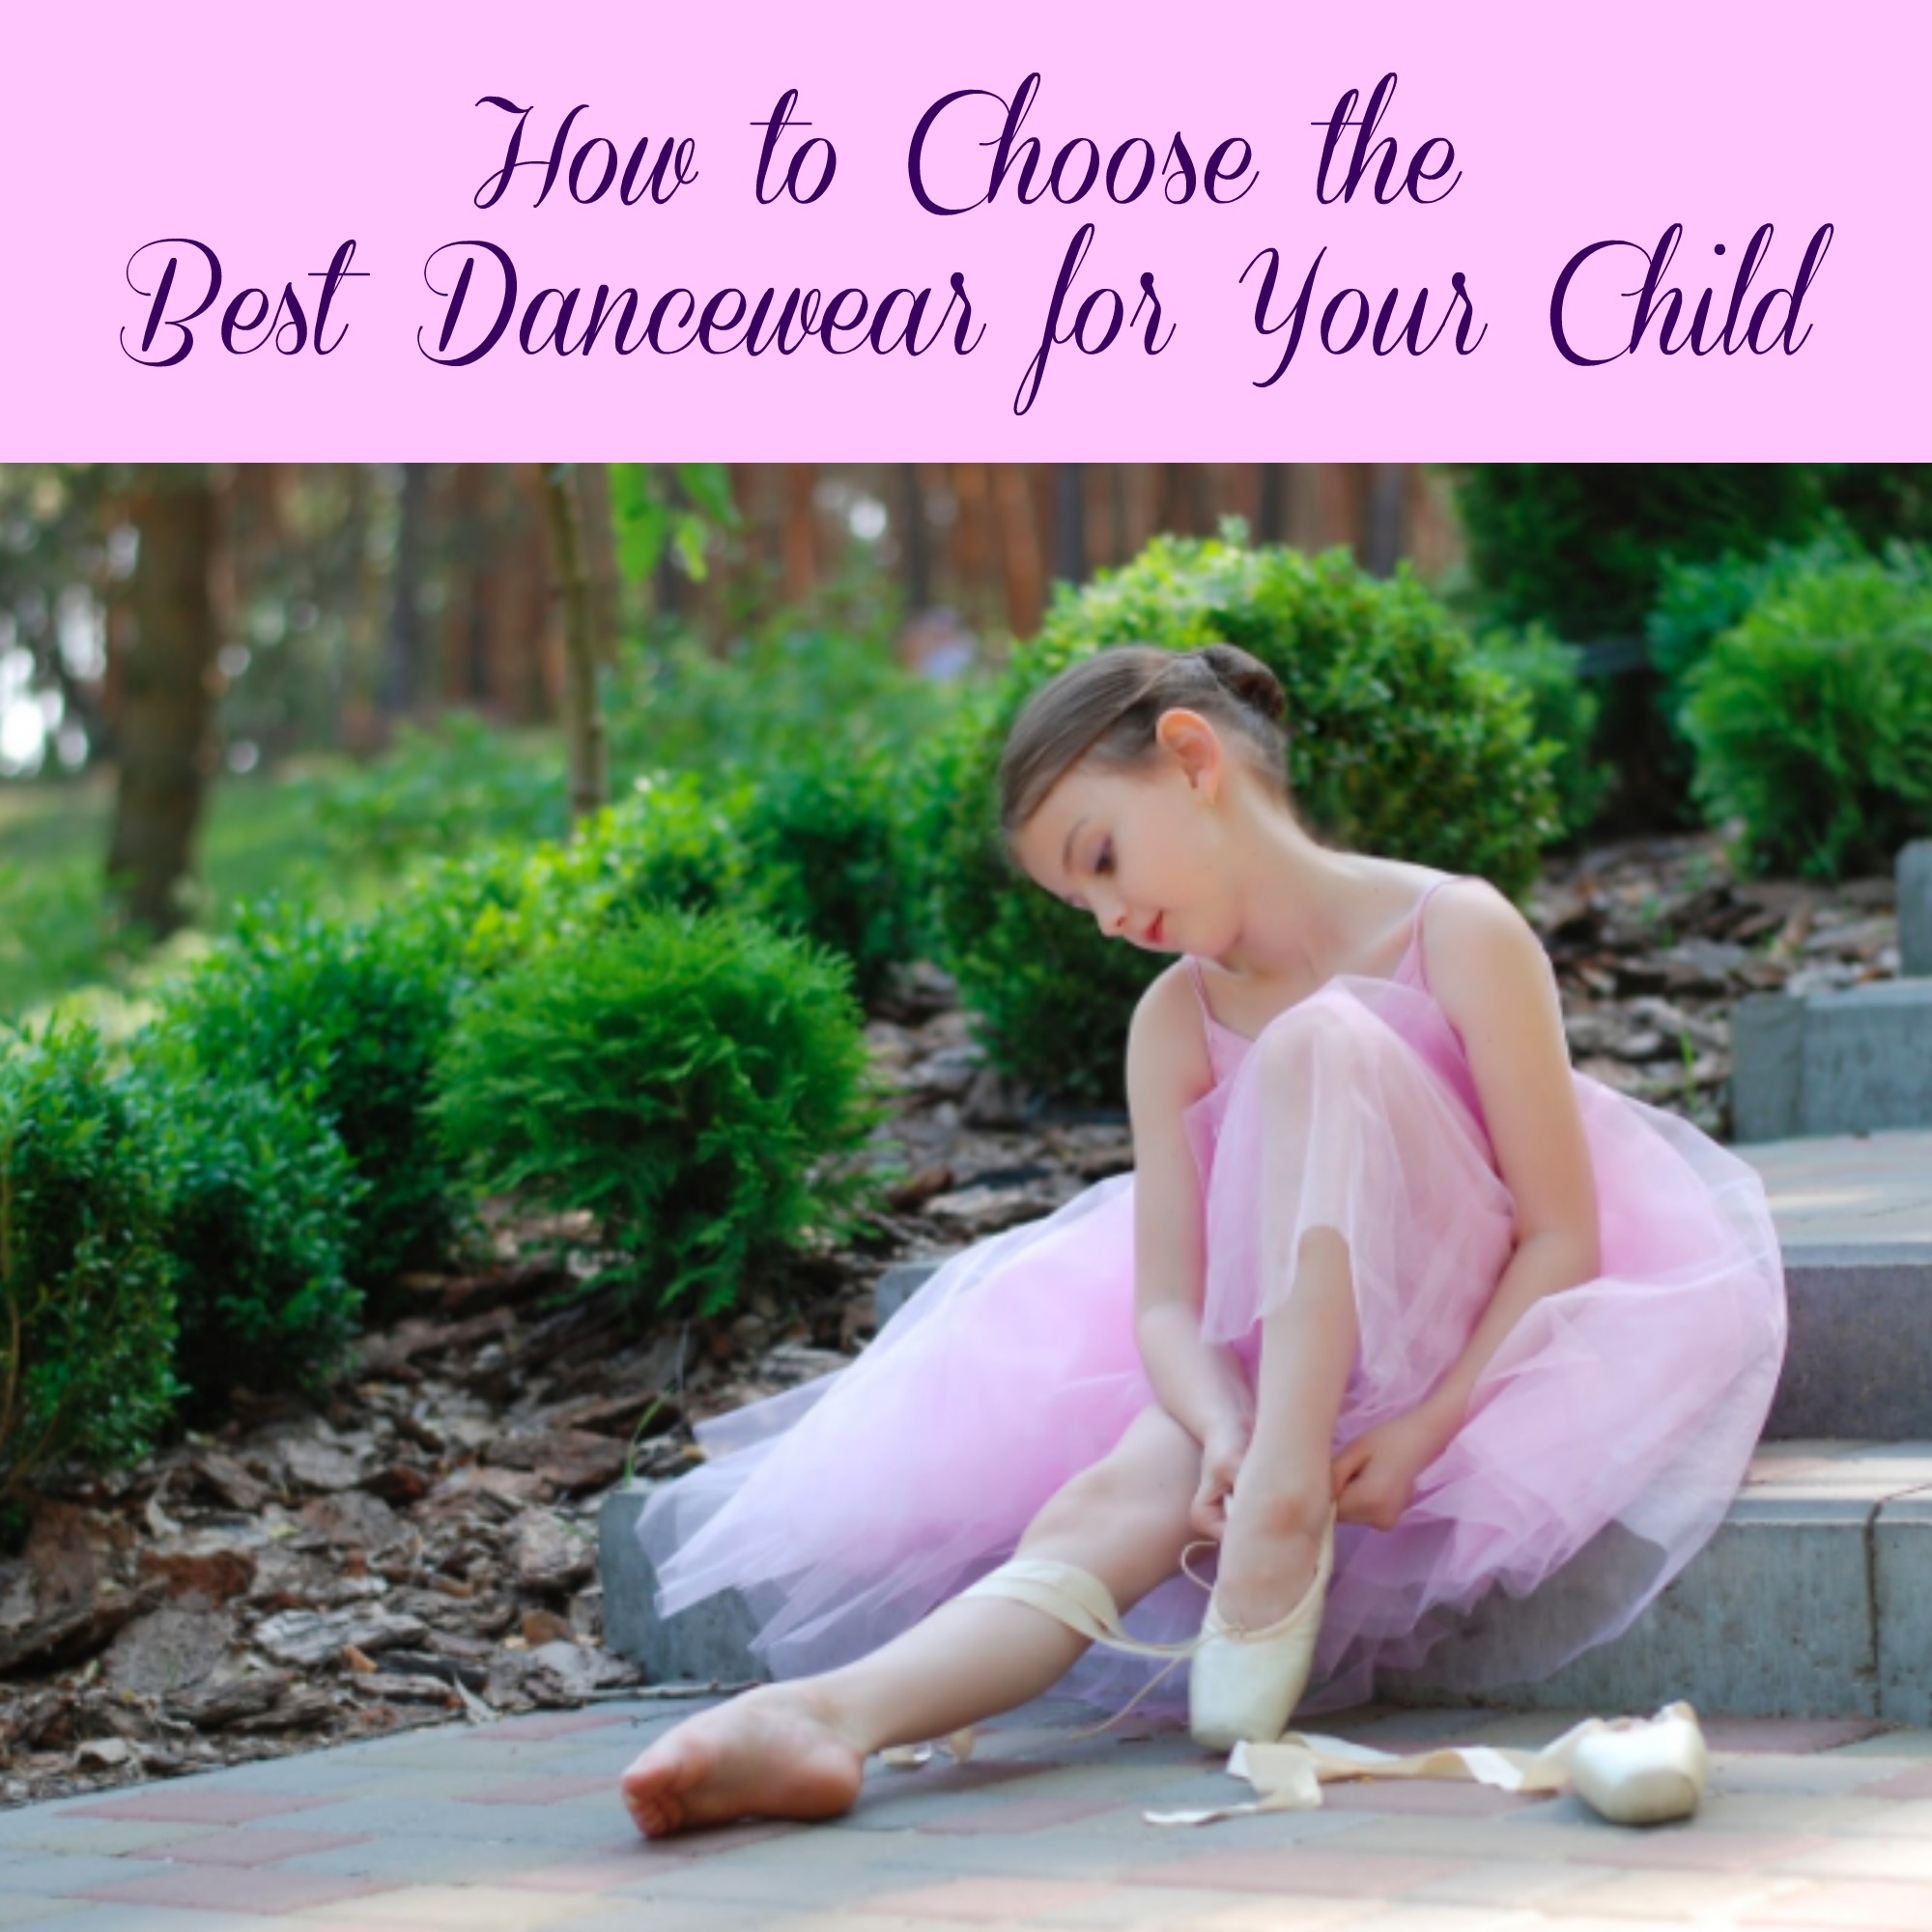 How to Choose the Best Dancewear for Your Child